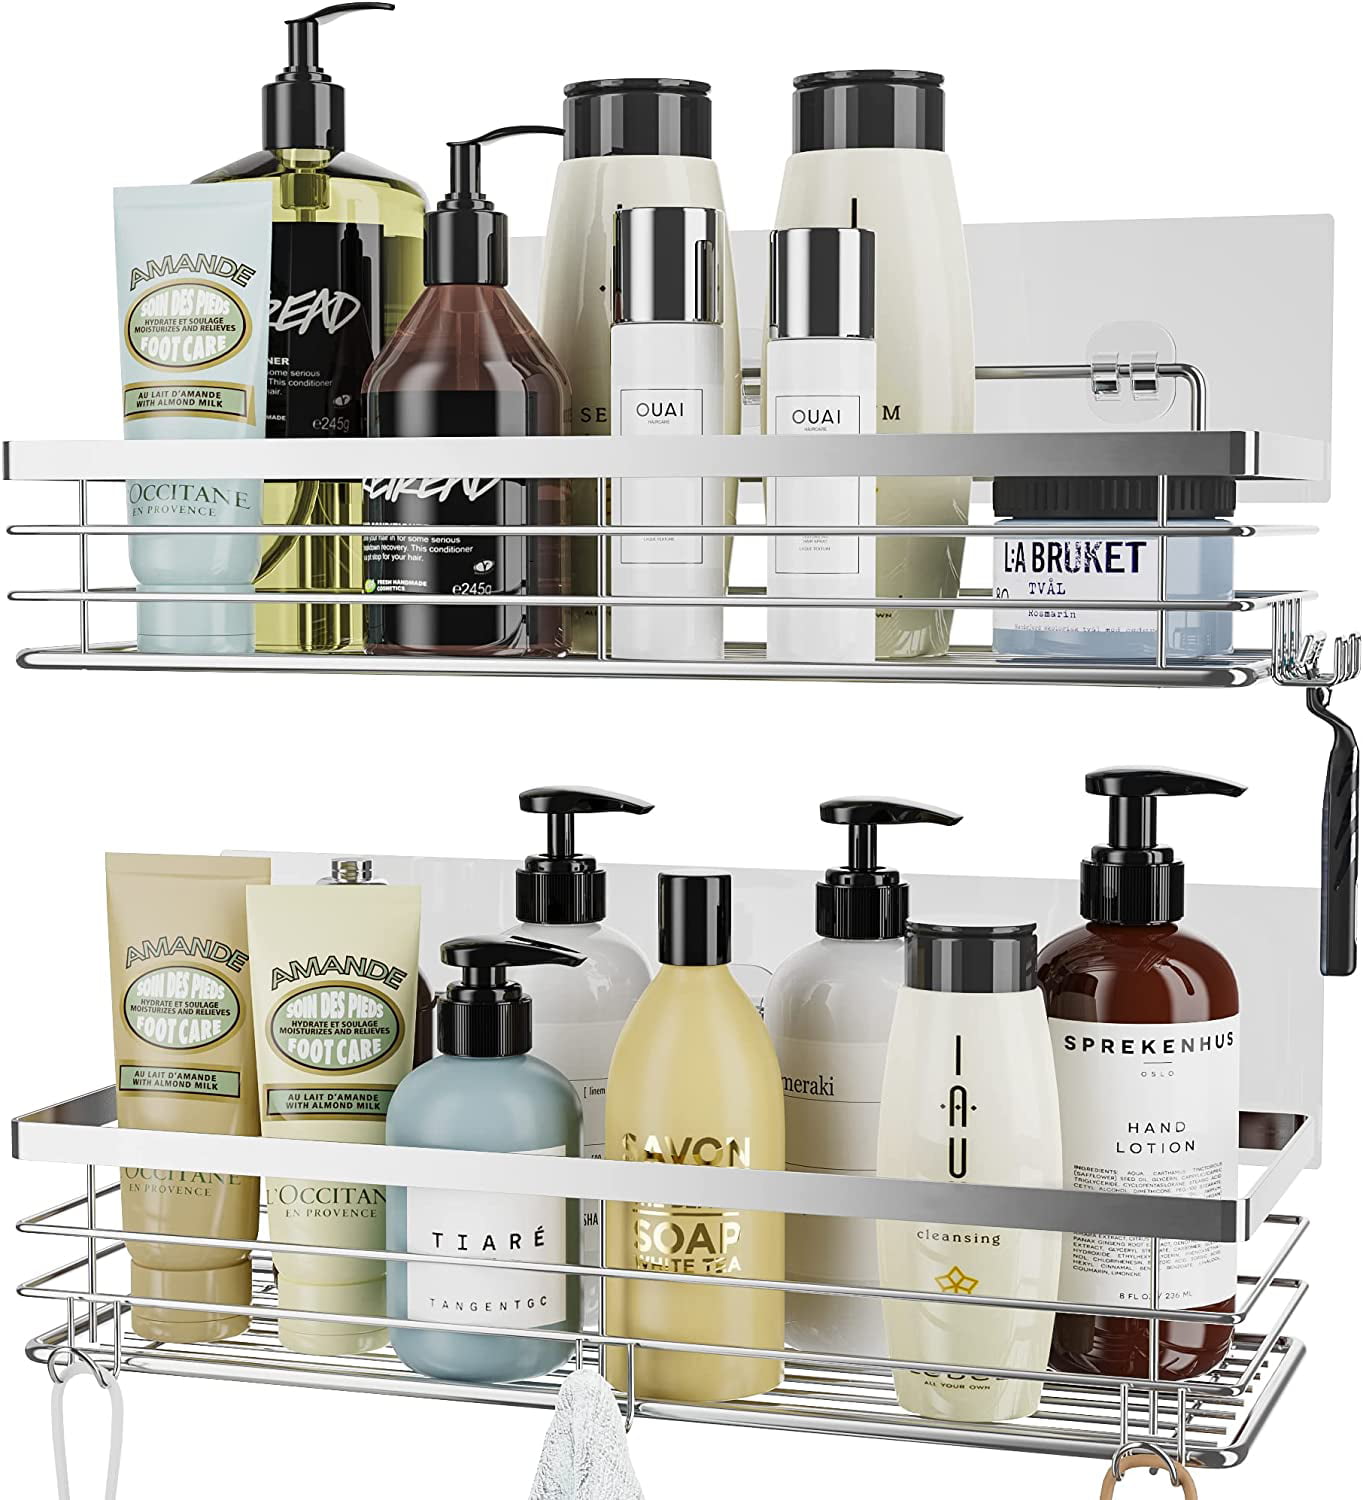 Orimade Shower Caddy with 5 Hooks Organizer for Hanging Razor and